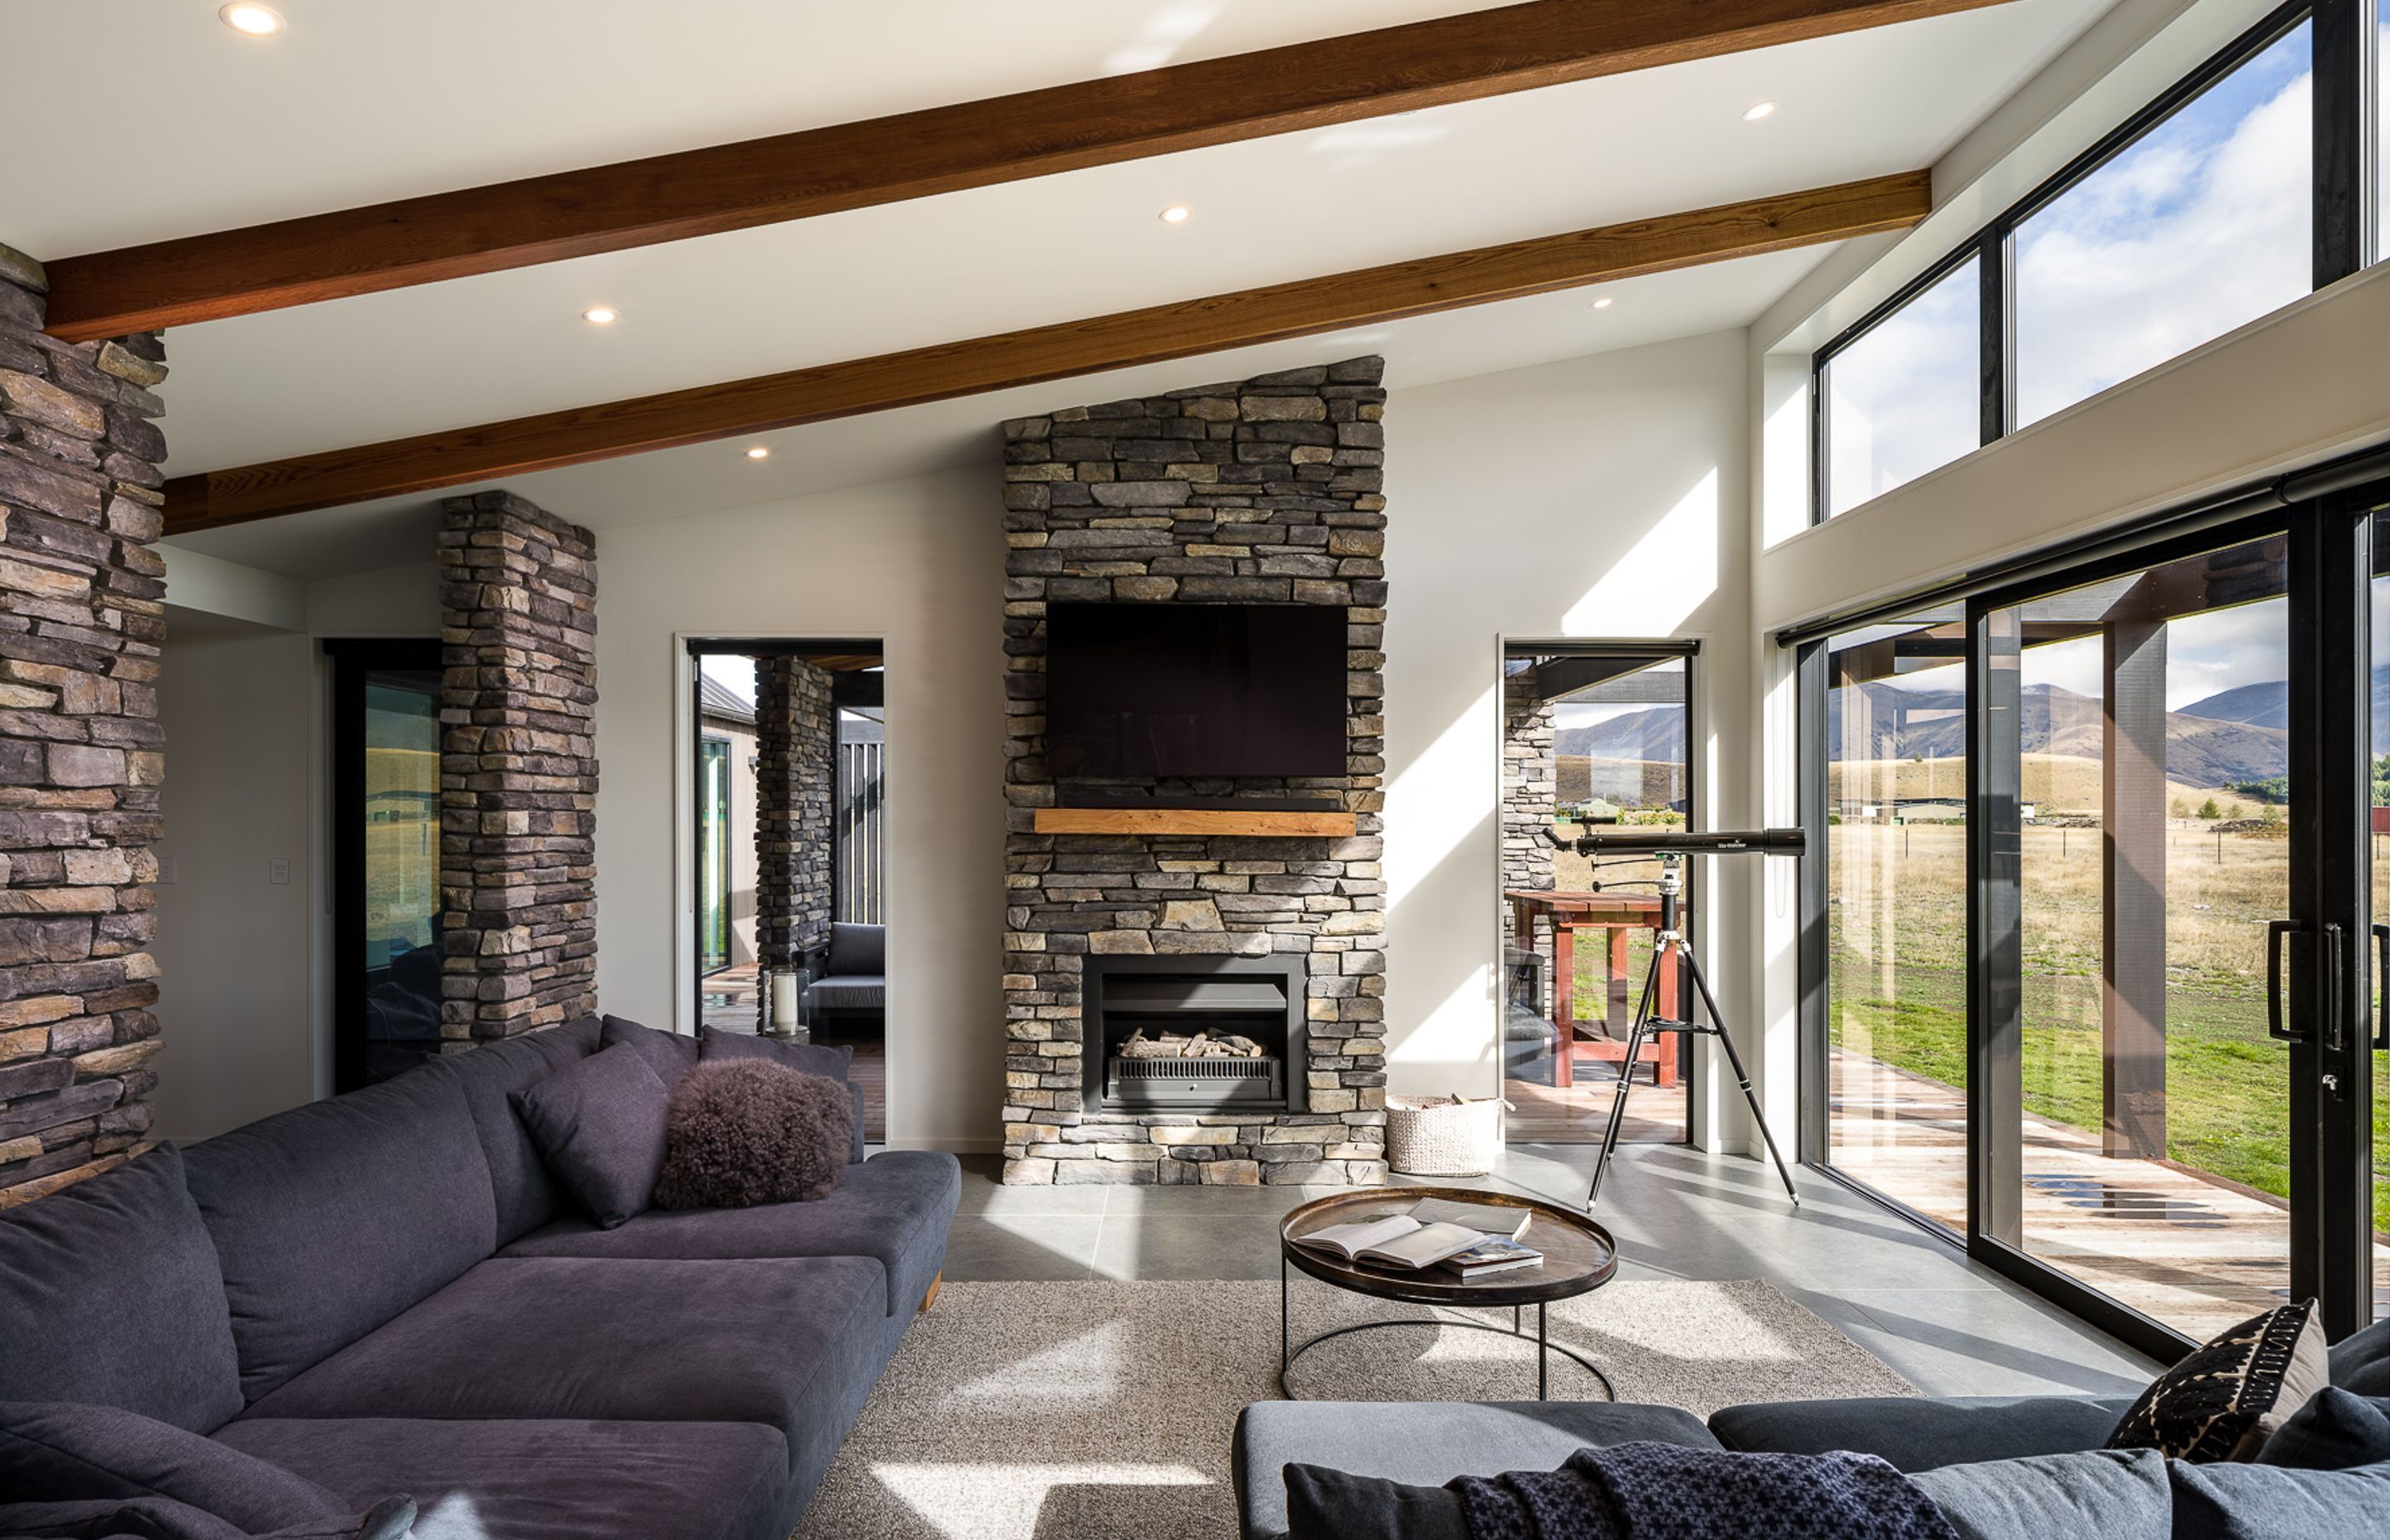 The monopitch ceiling with clerestory windows allows natural light to fully penetrate into the lounge.